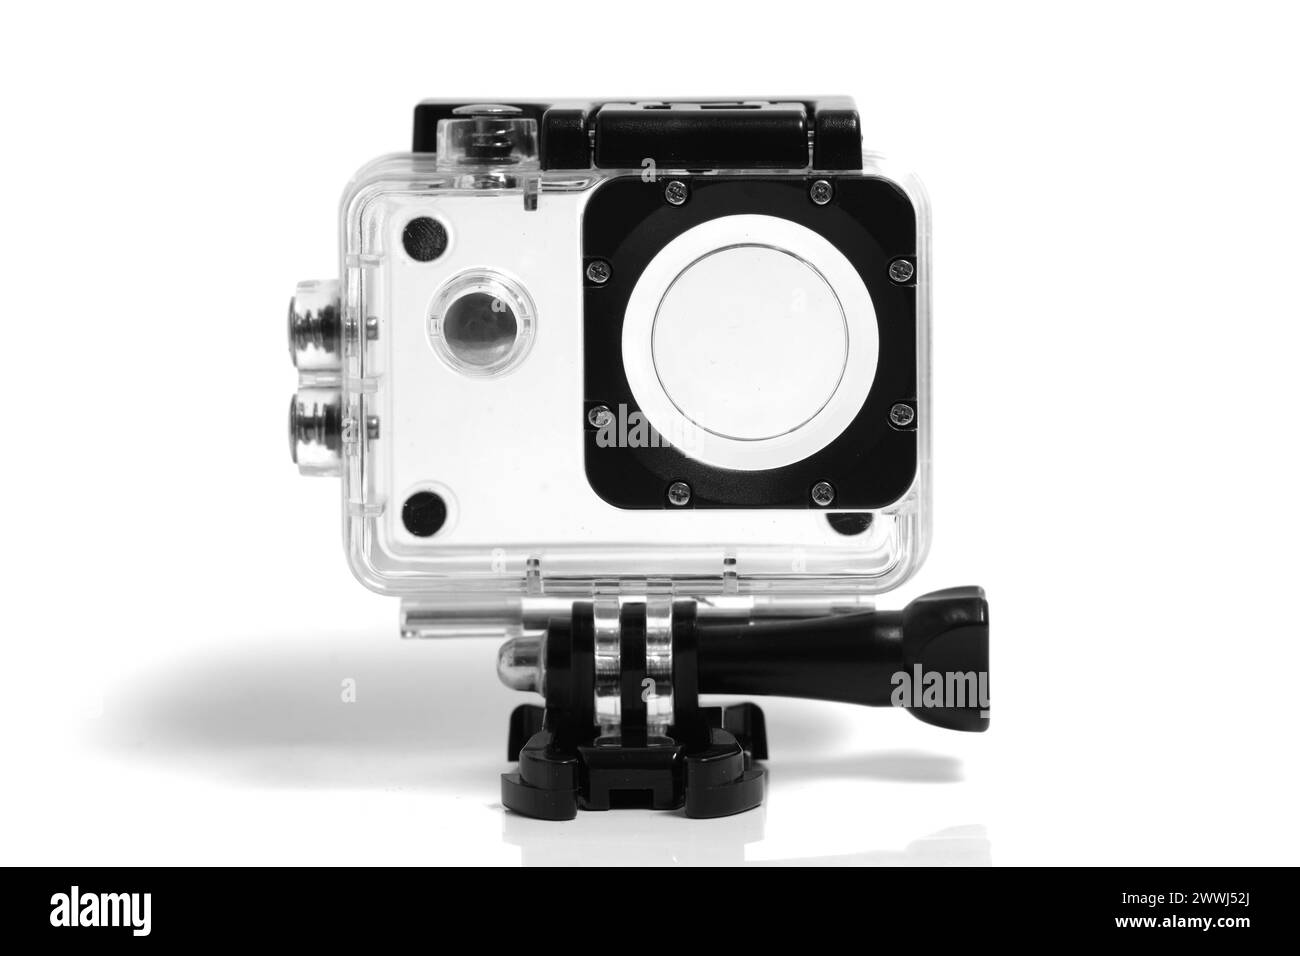 Waterproof case for an action camera. On a white background Stock Photo